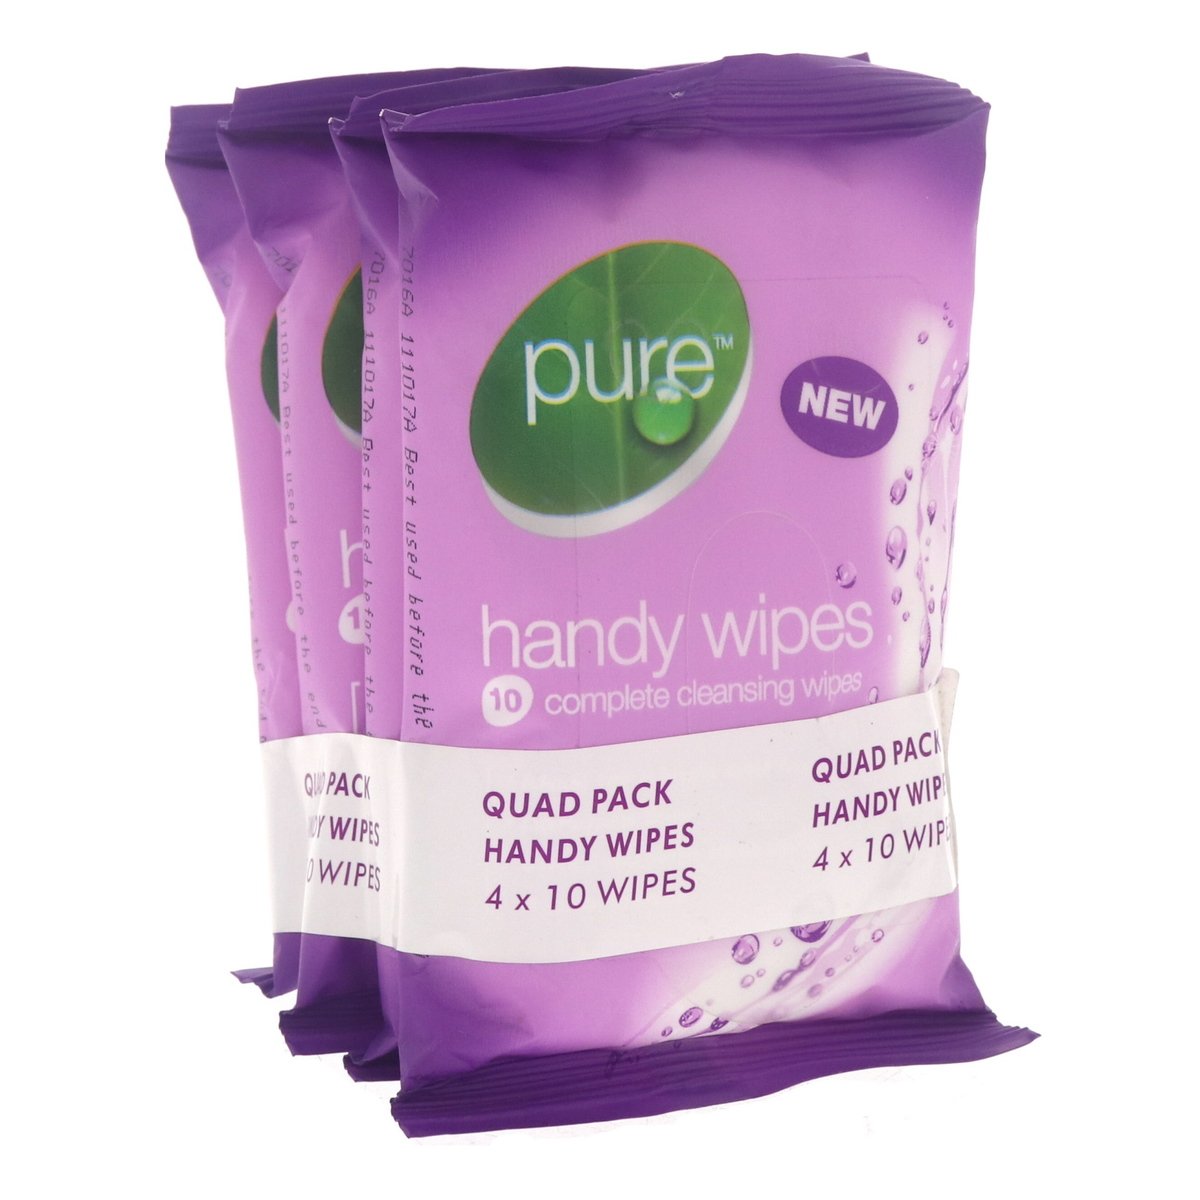 Pure Handy Wipes Complete Cleansing Wipes 4 x 10 wipes